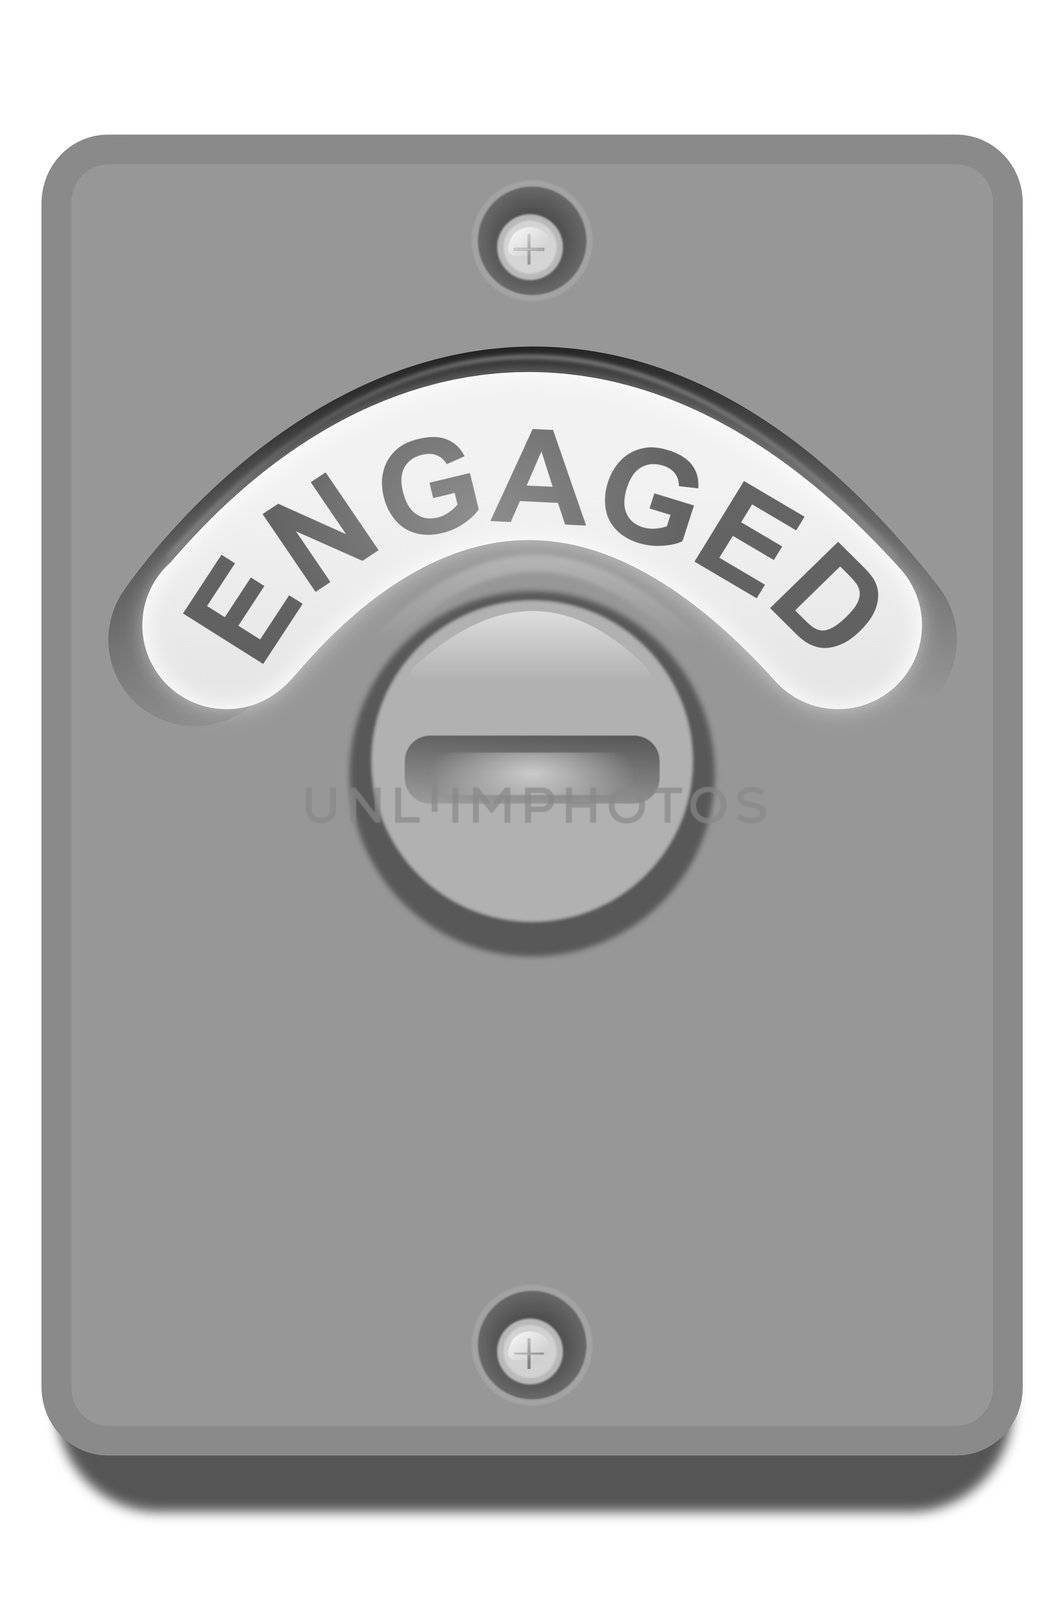 Engaged lock. by 72soul